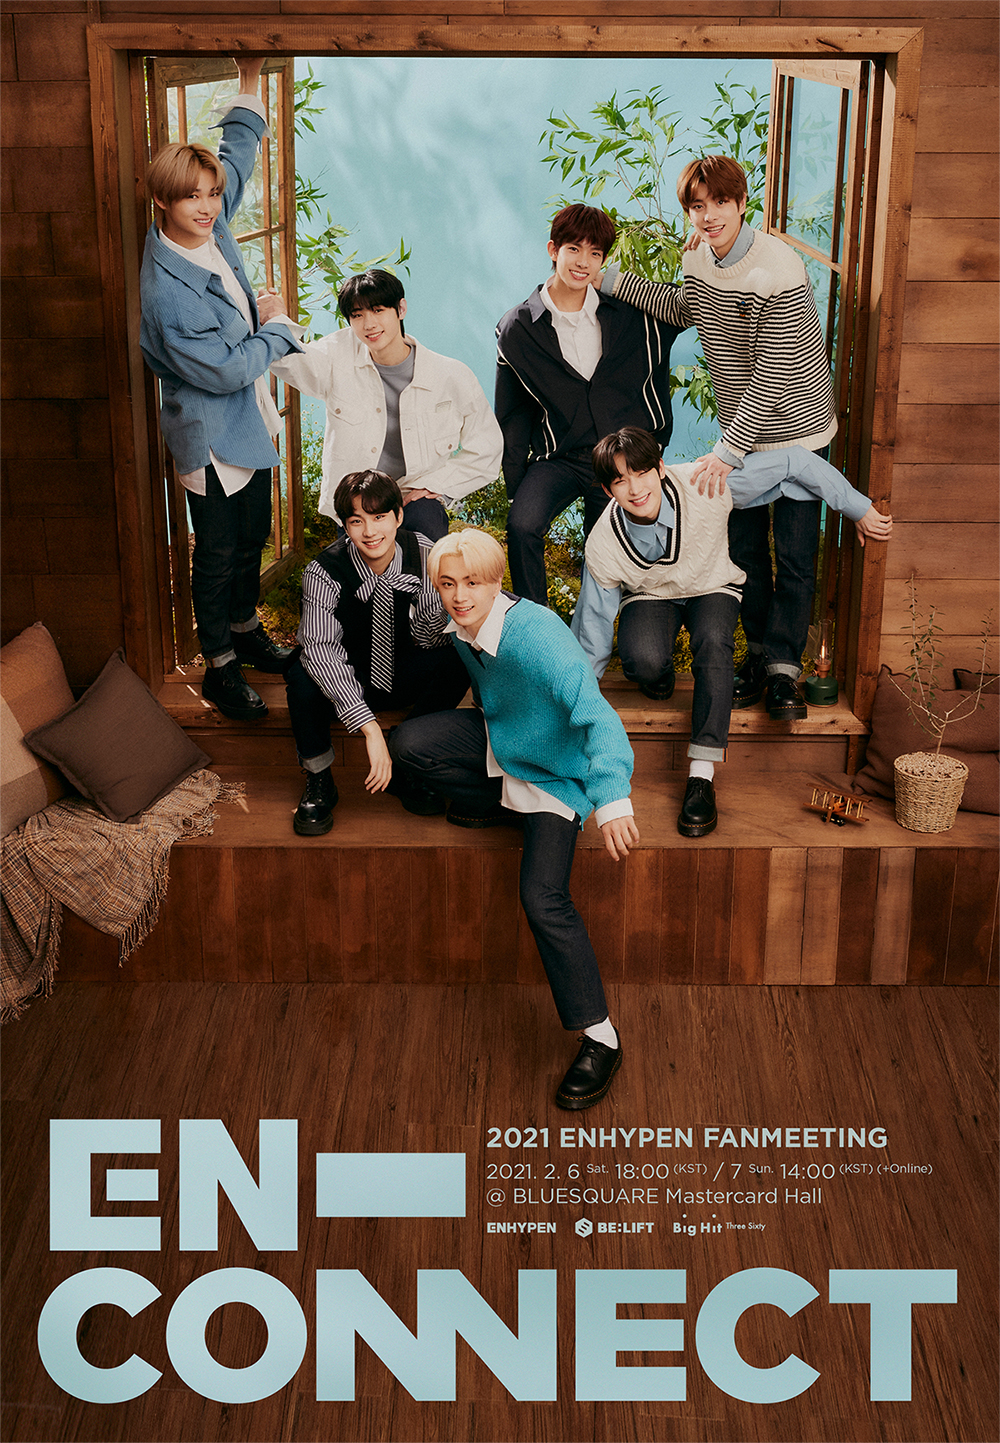 ENHYPEN finishes their debut album activities